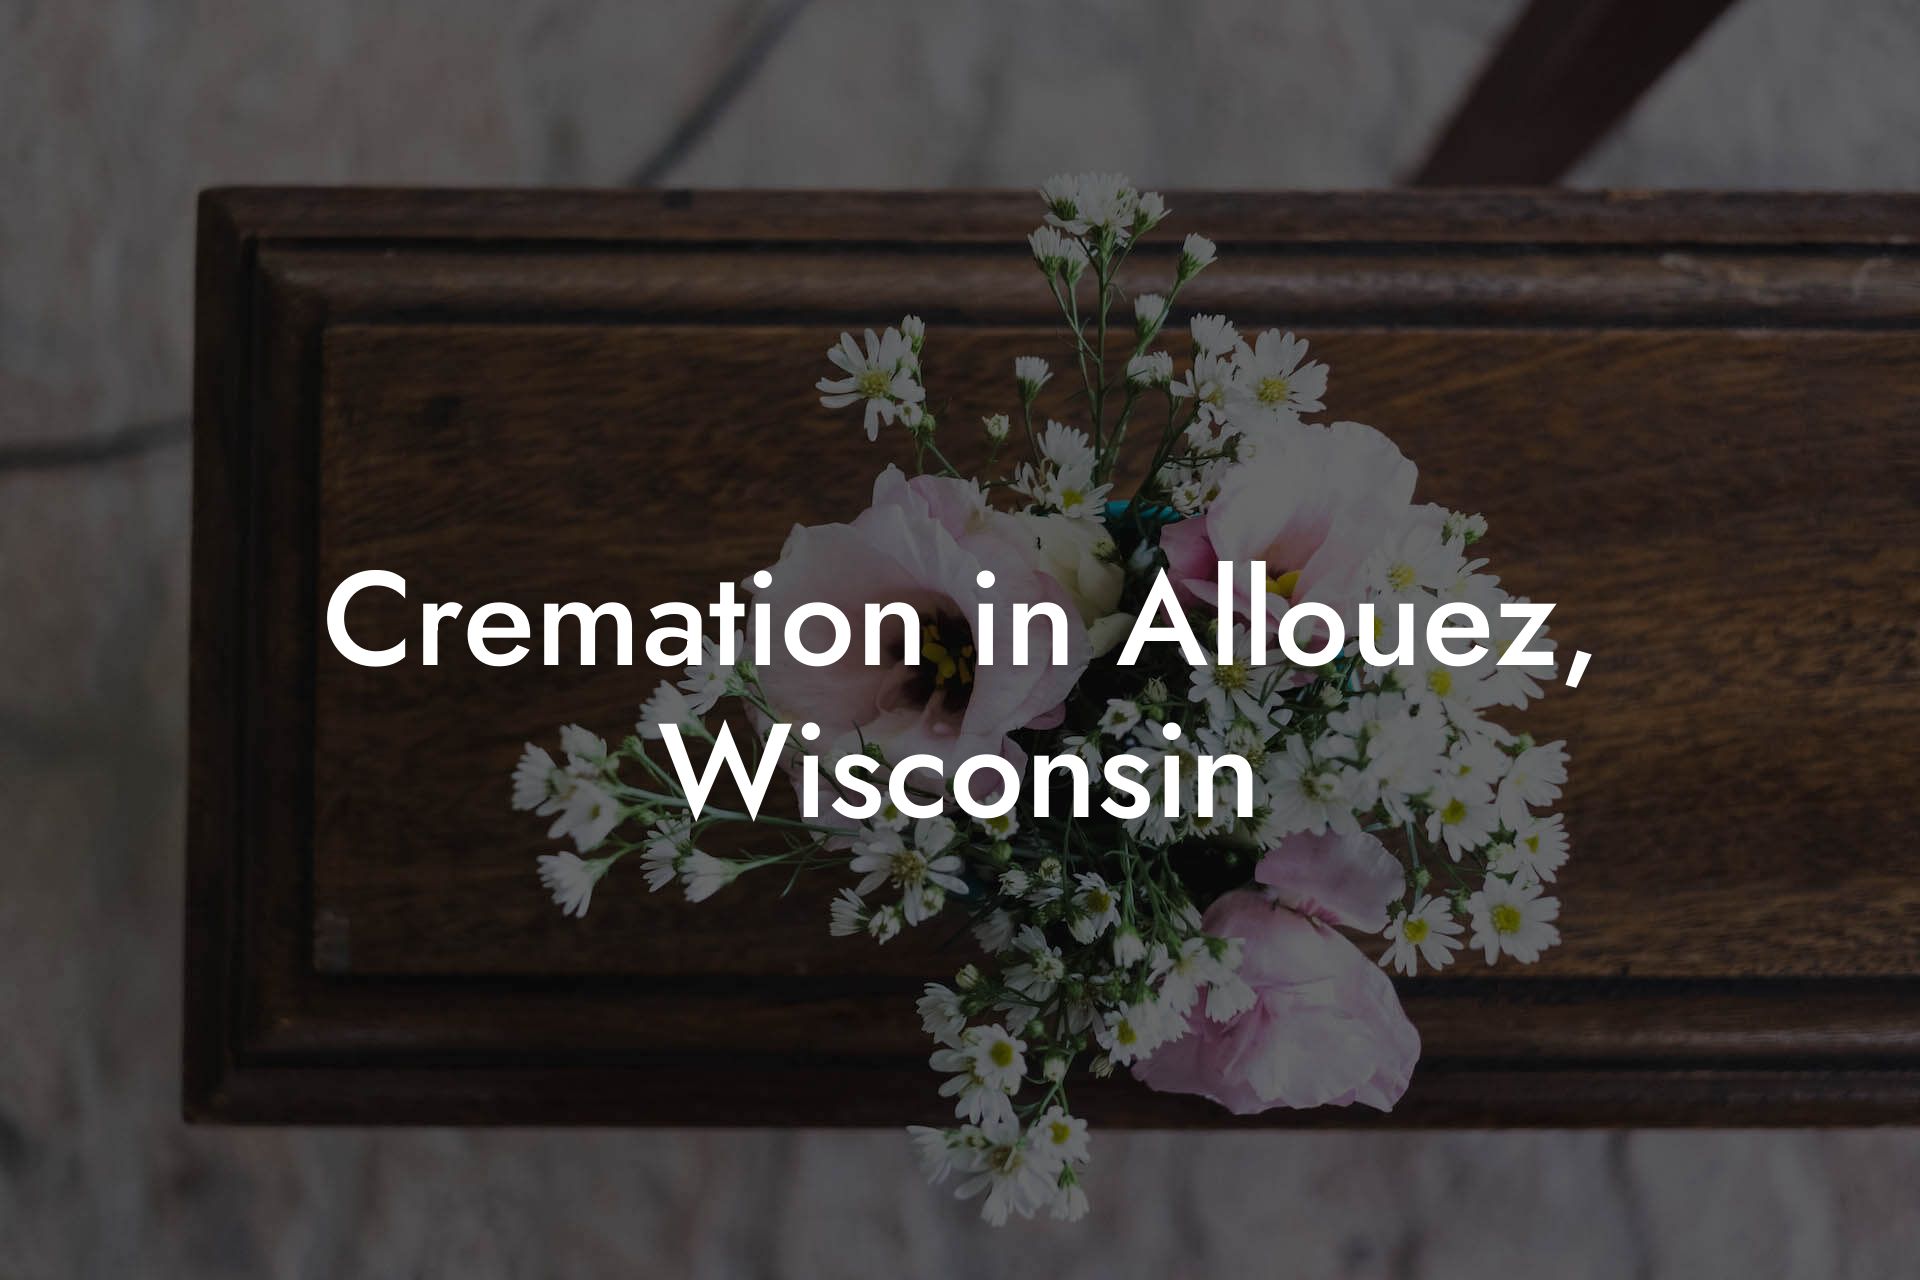 Cremation in Allouez, Wisconsin